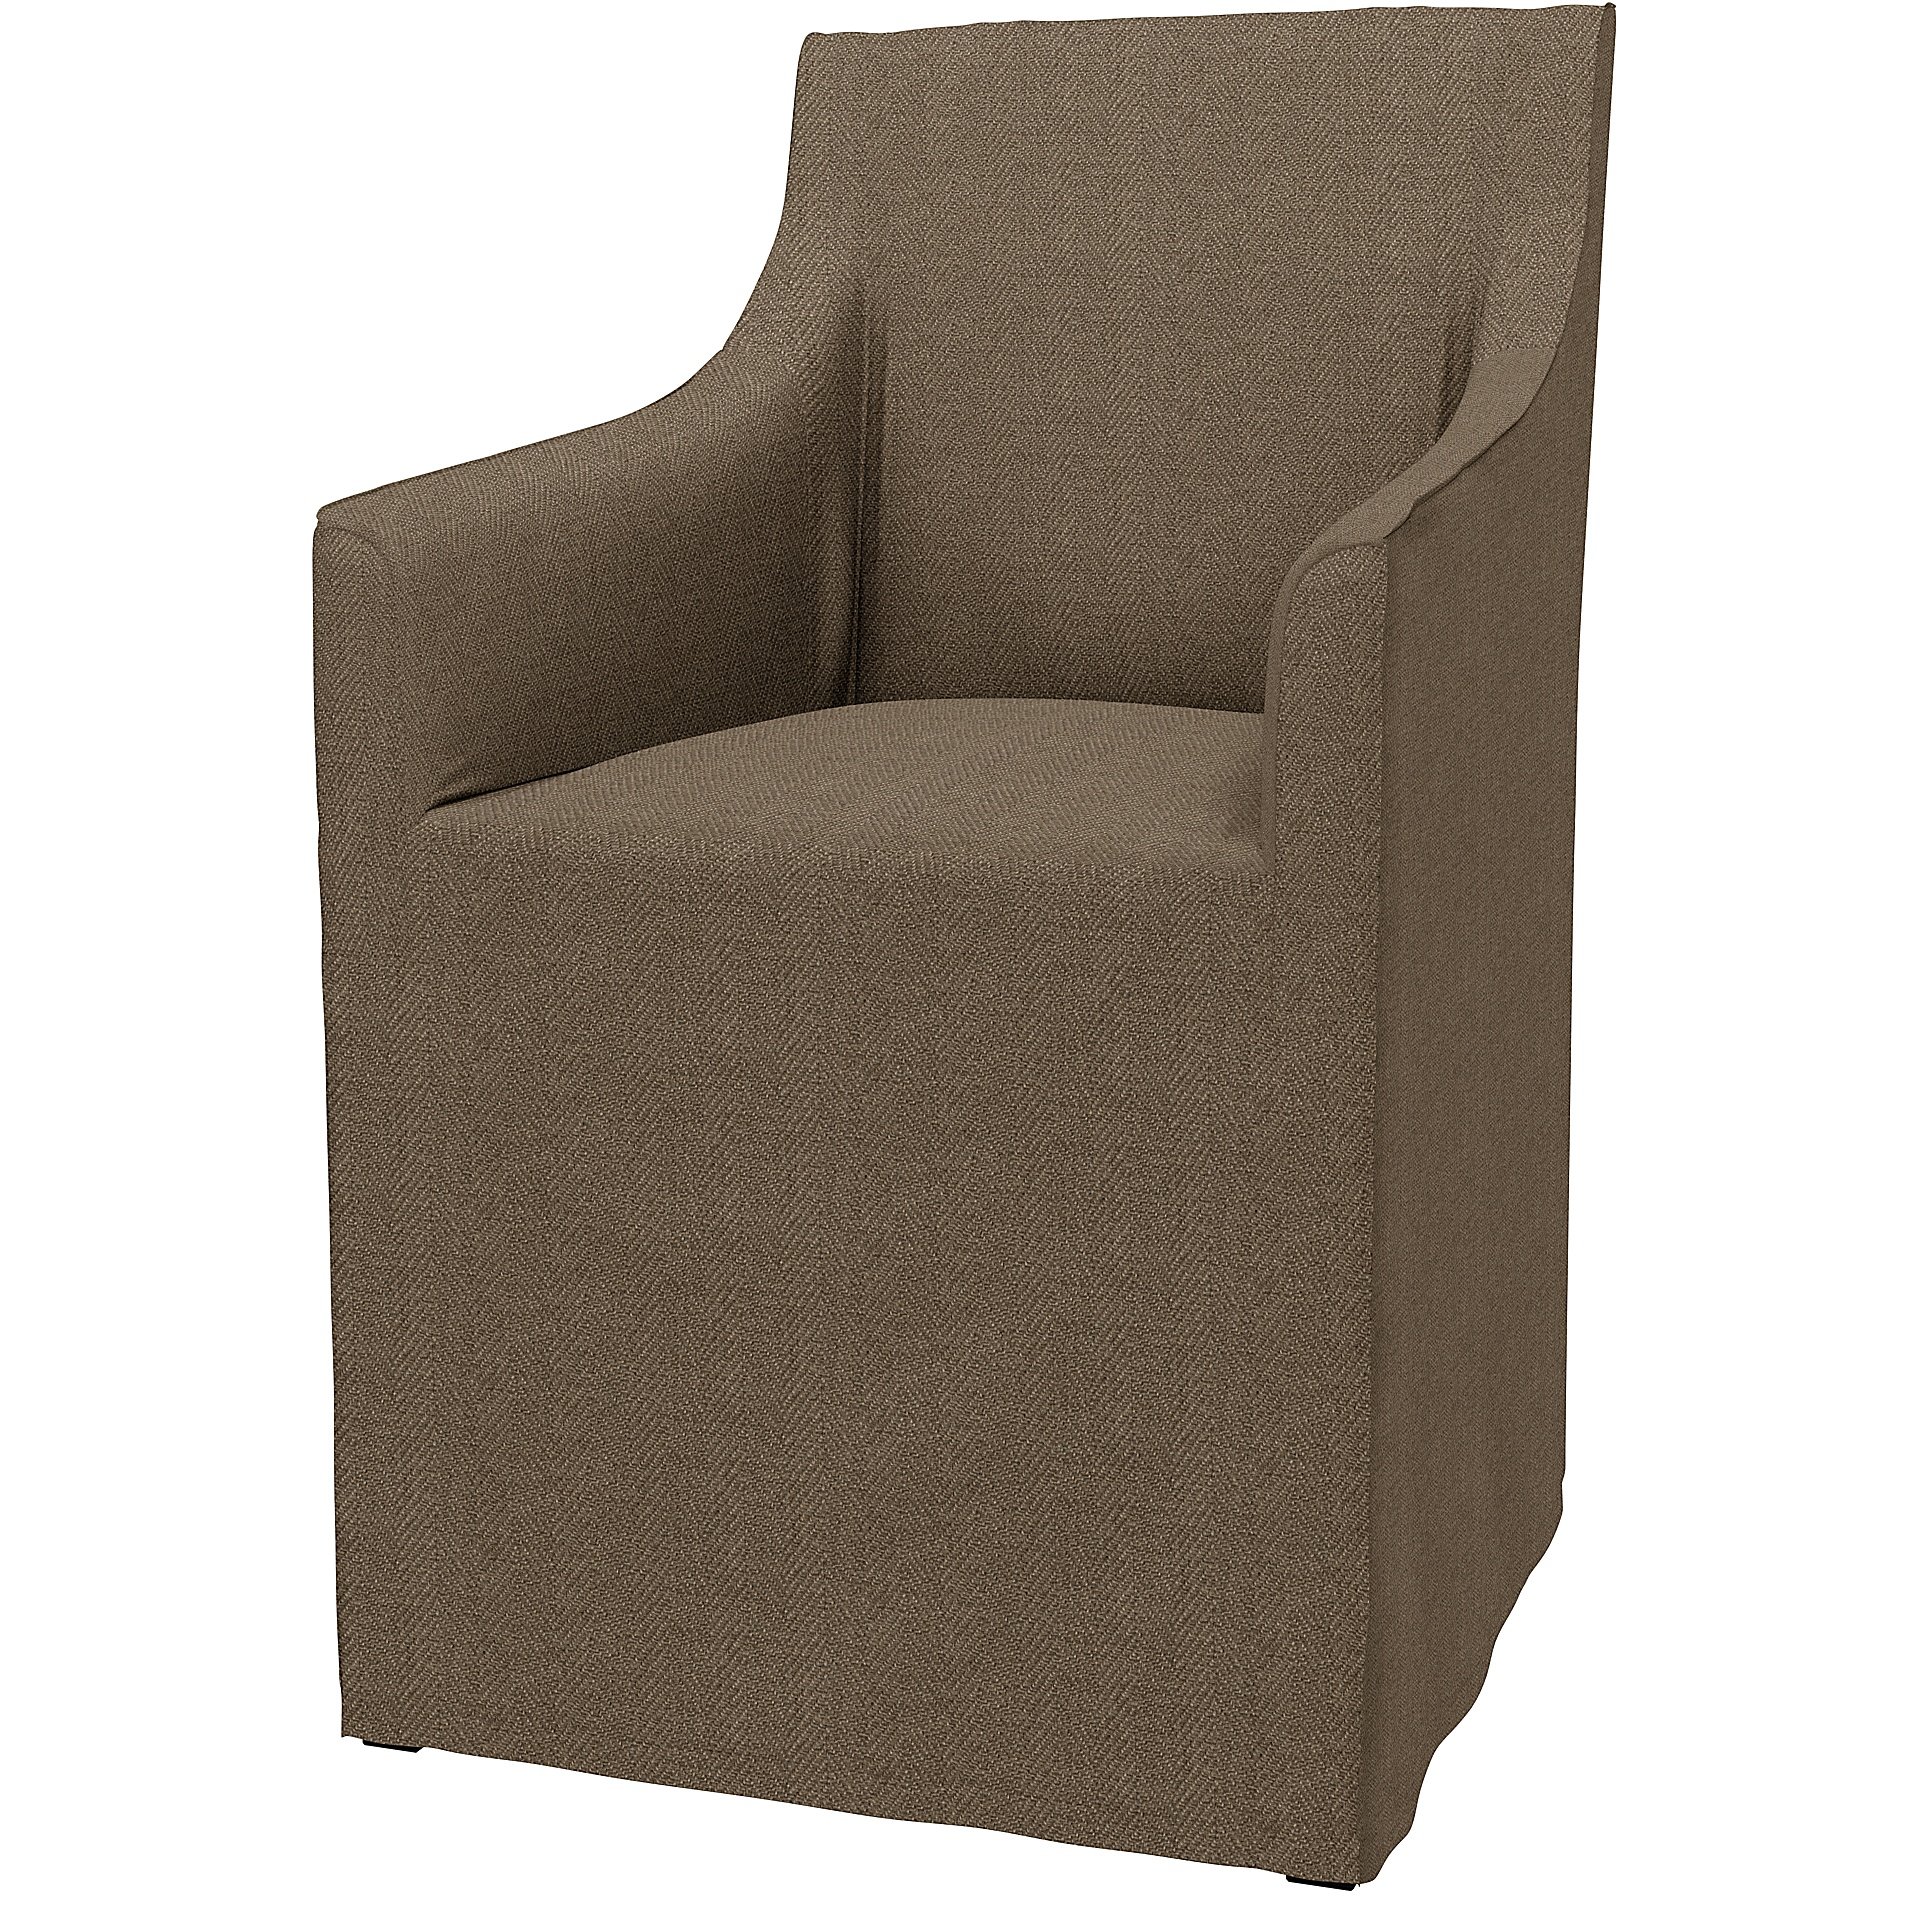 IKEA - Sakarias Chair with Armrests Cover, Dark Taupe, Boucle & Texture - Bemz